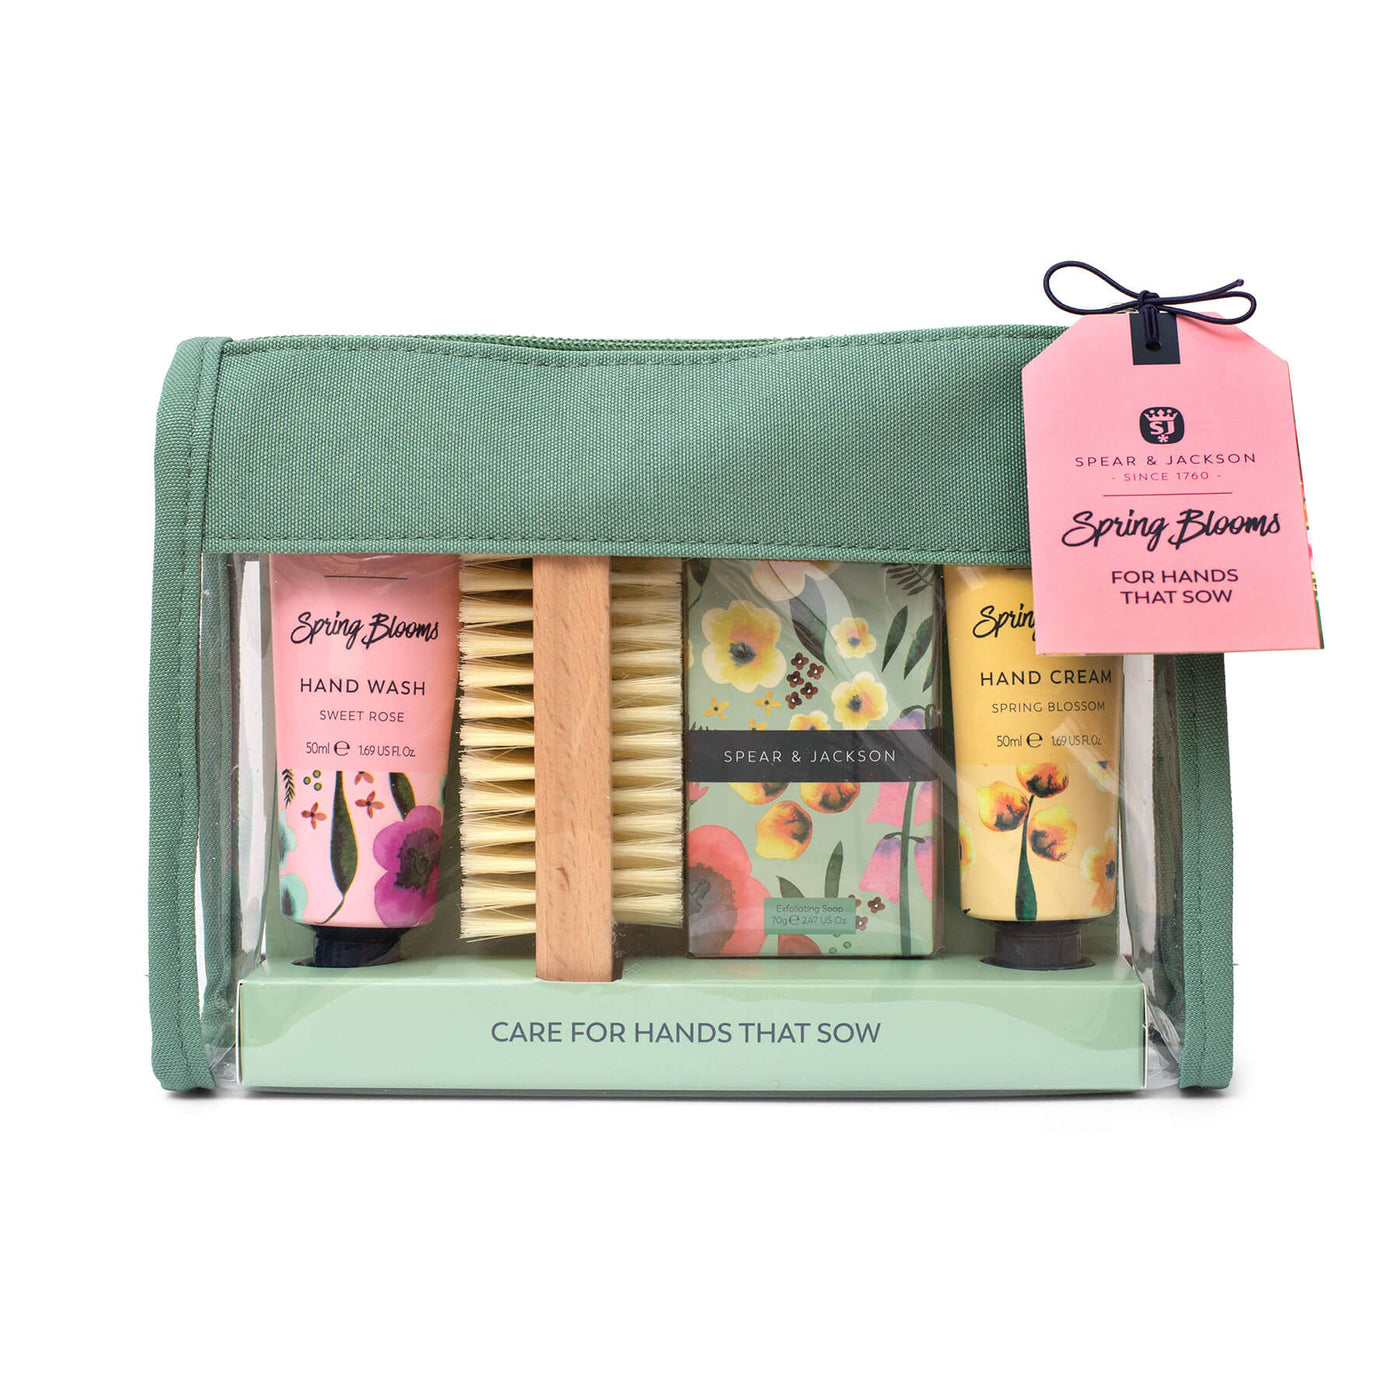 Spear & Jackson Spring Blooms Handcare Gift Set For Hands That Sow